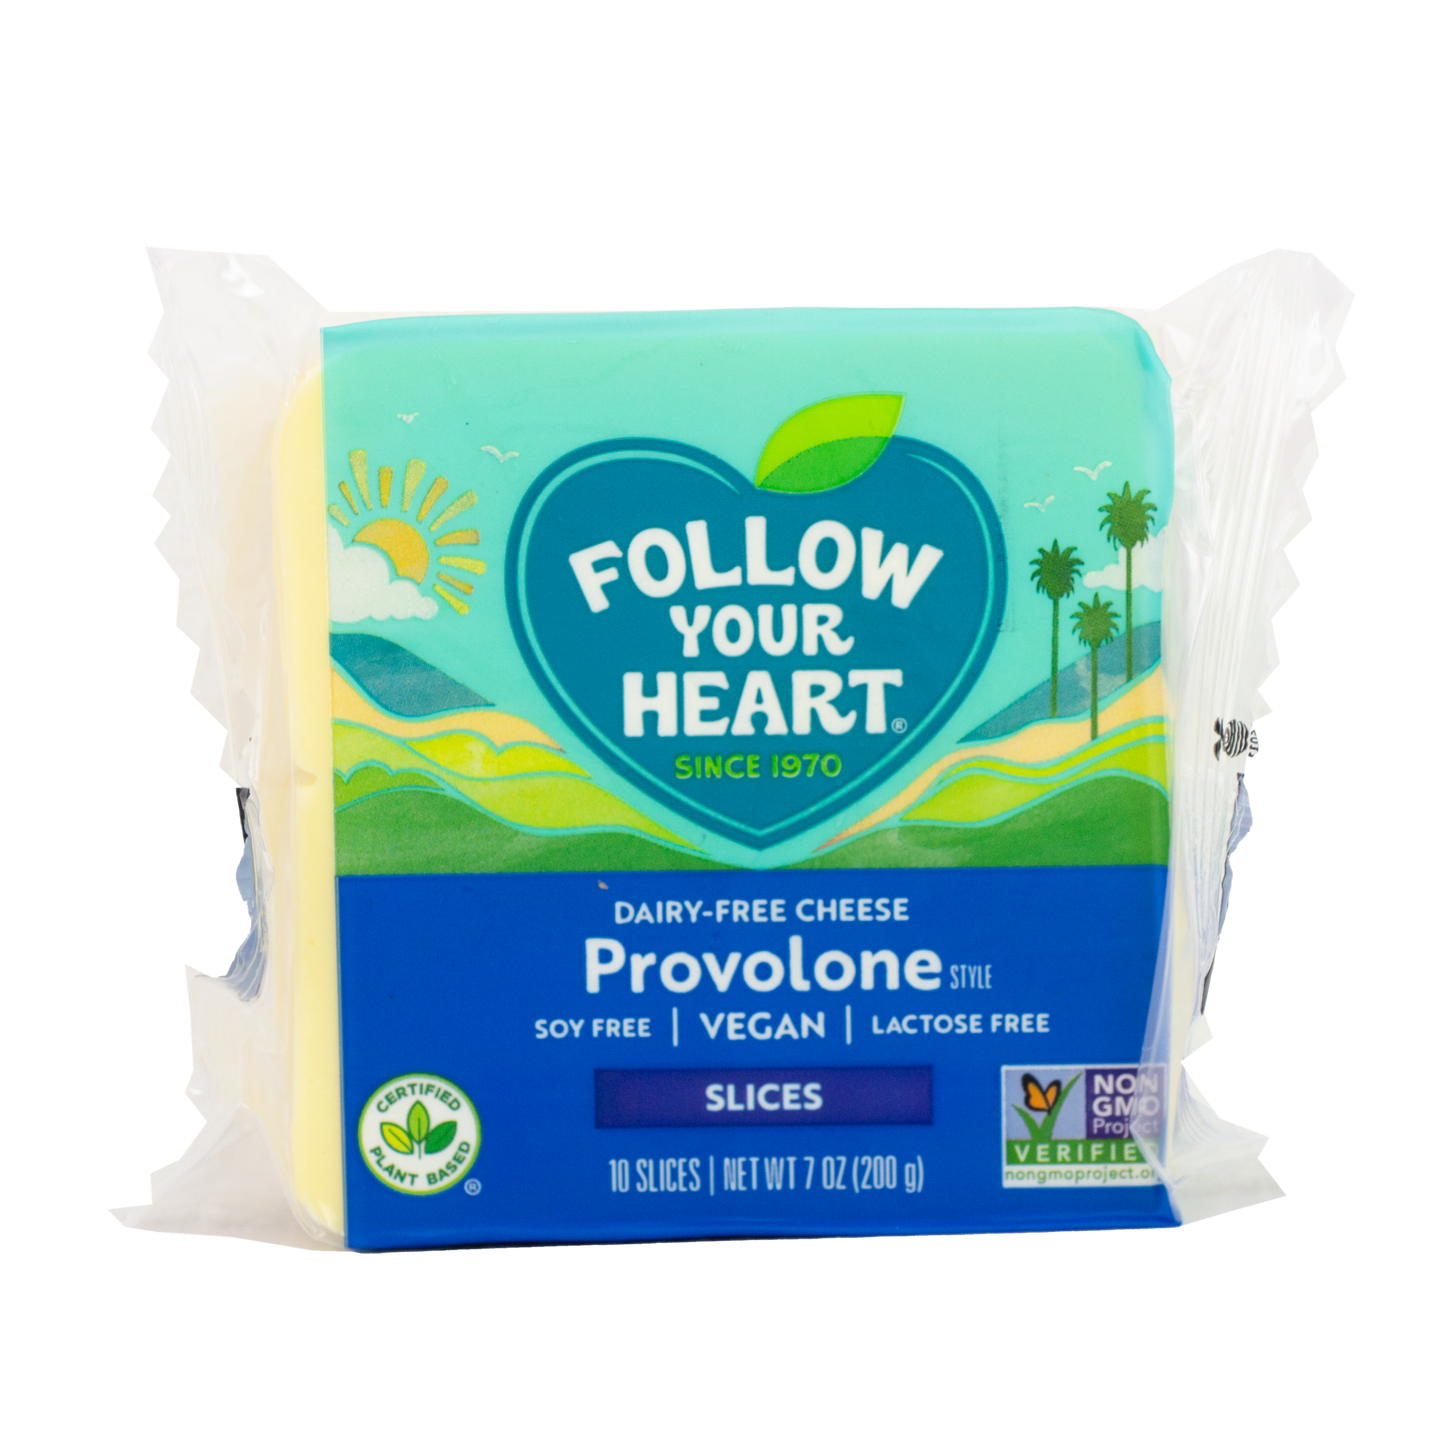 Follow Your Heart - Vegan Cheese Provolone Slices (Pick-Up Store Only)